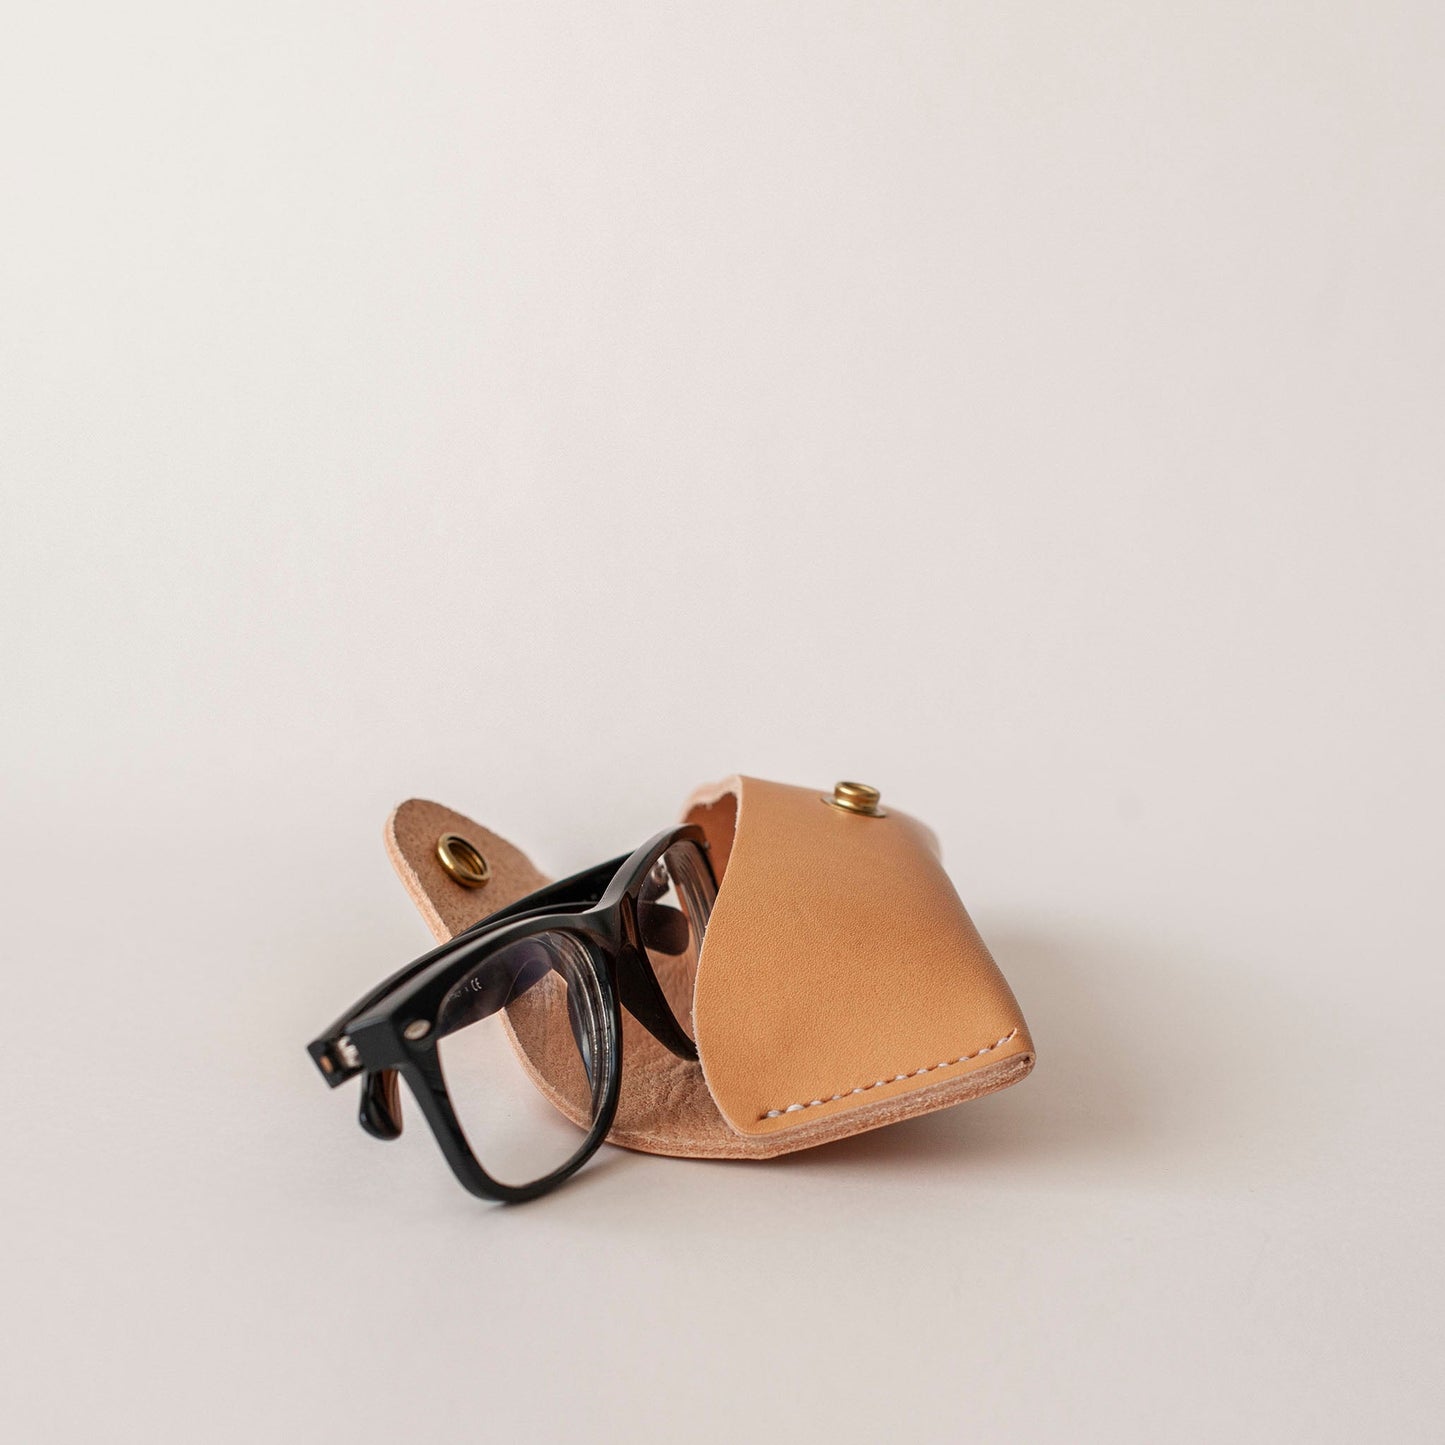 Optical Glasses in Nude Leather case with white stitching and brass stud button